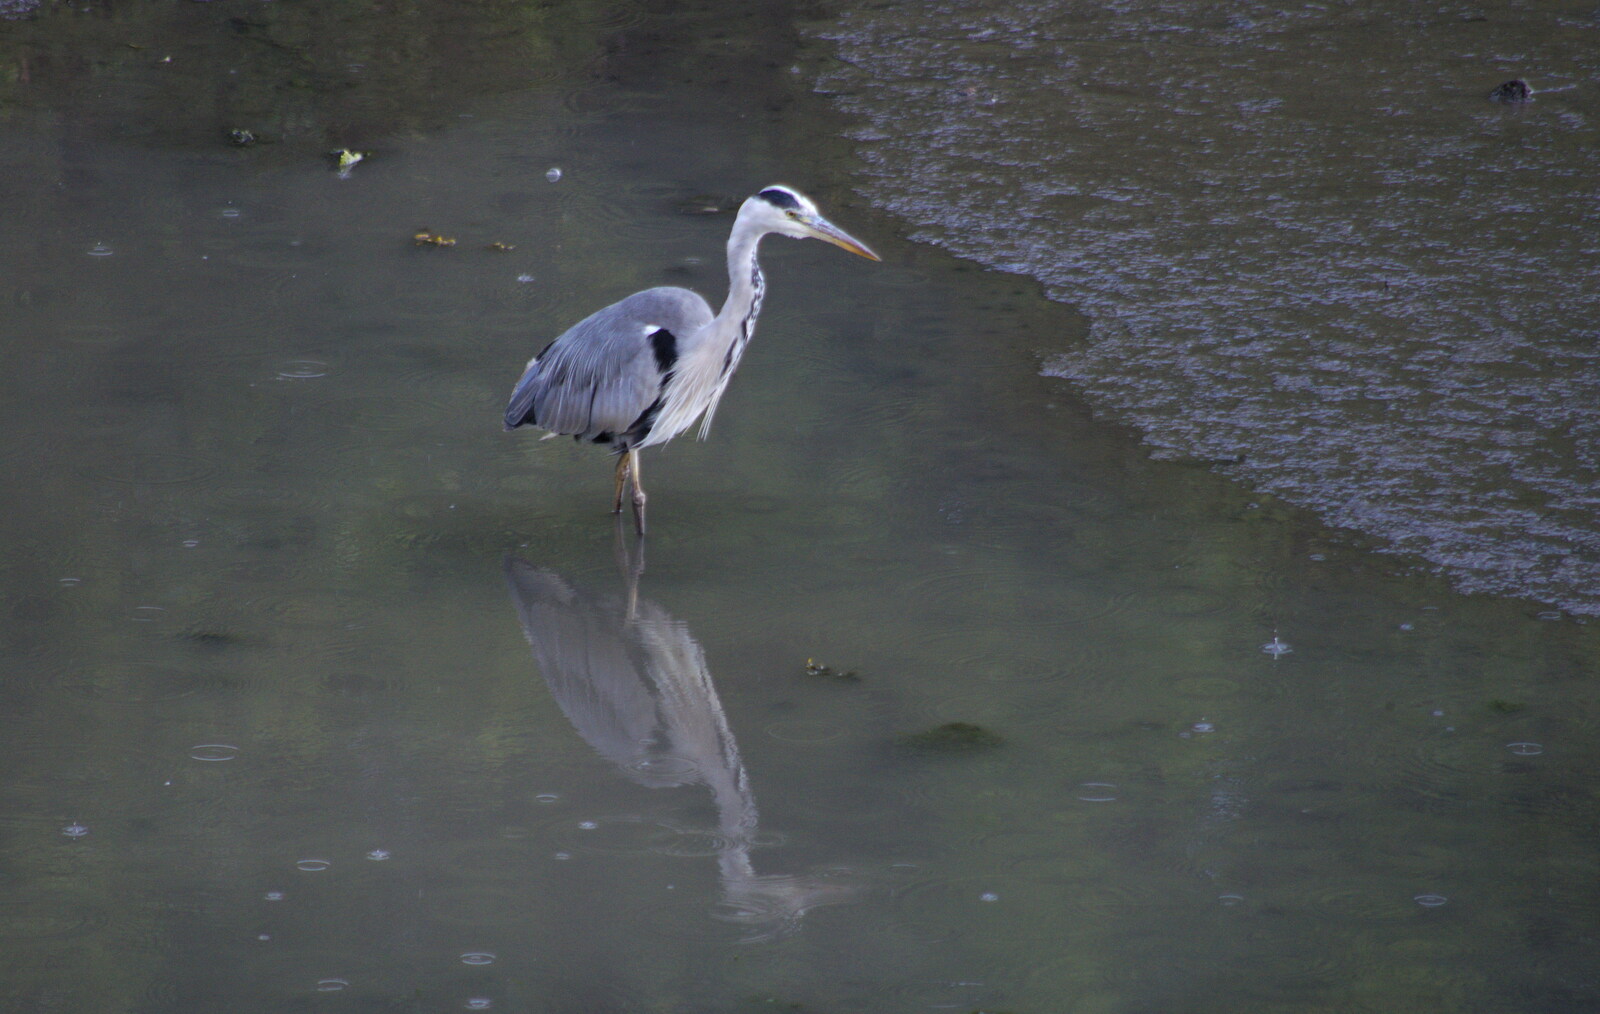 A Heron pokes about in manky water from Busking in Temple Bar, Dublin, Ireland - 12th August 2019